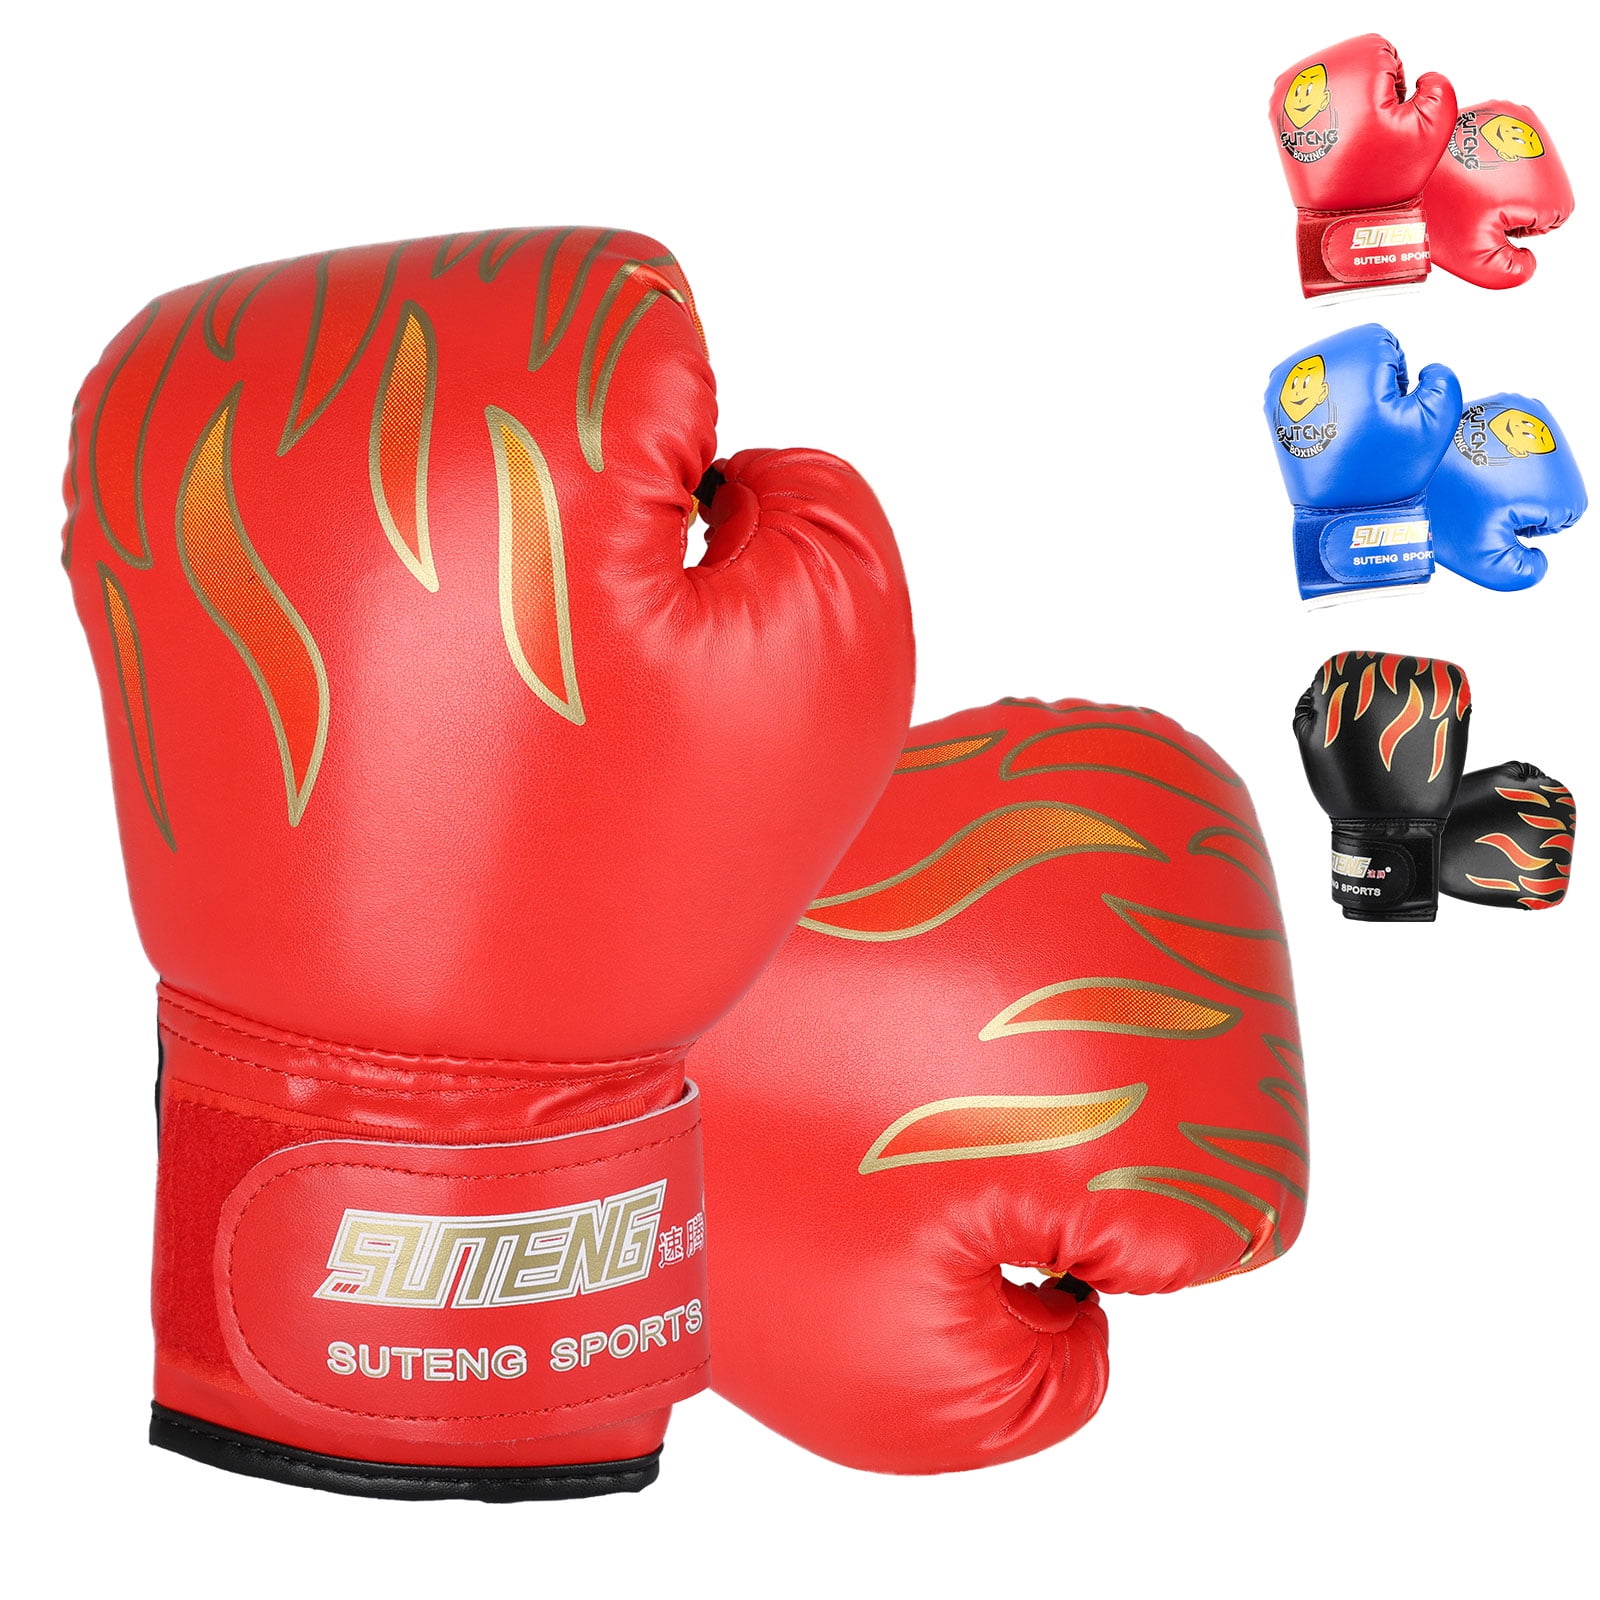 Hook and Jab Focus Pads Training Mitts Kick Boxing Punching MMA Sparring UFC Gym 